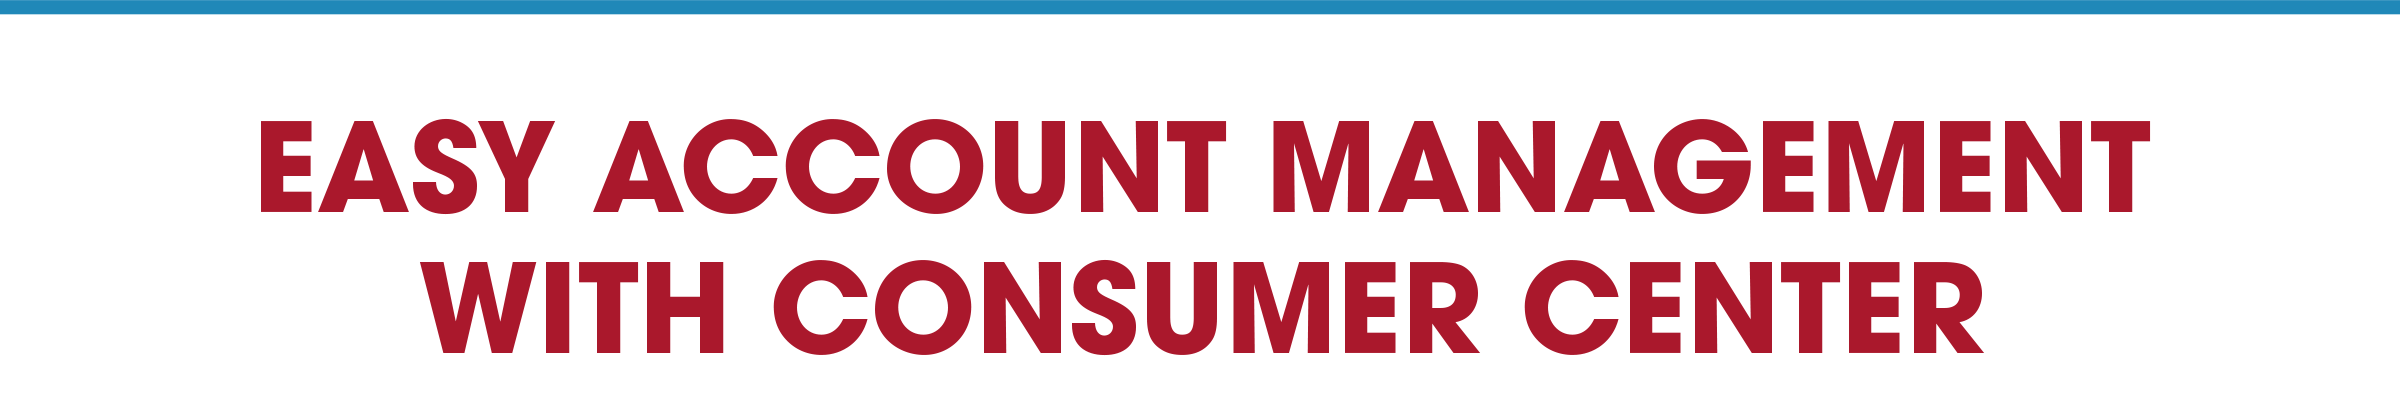 EASY ACCOUNT MANAGEMENT WITH CONSUMER CENTER